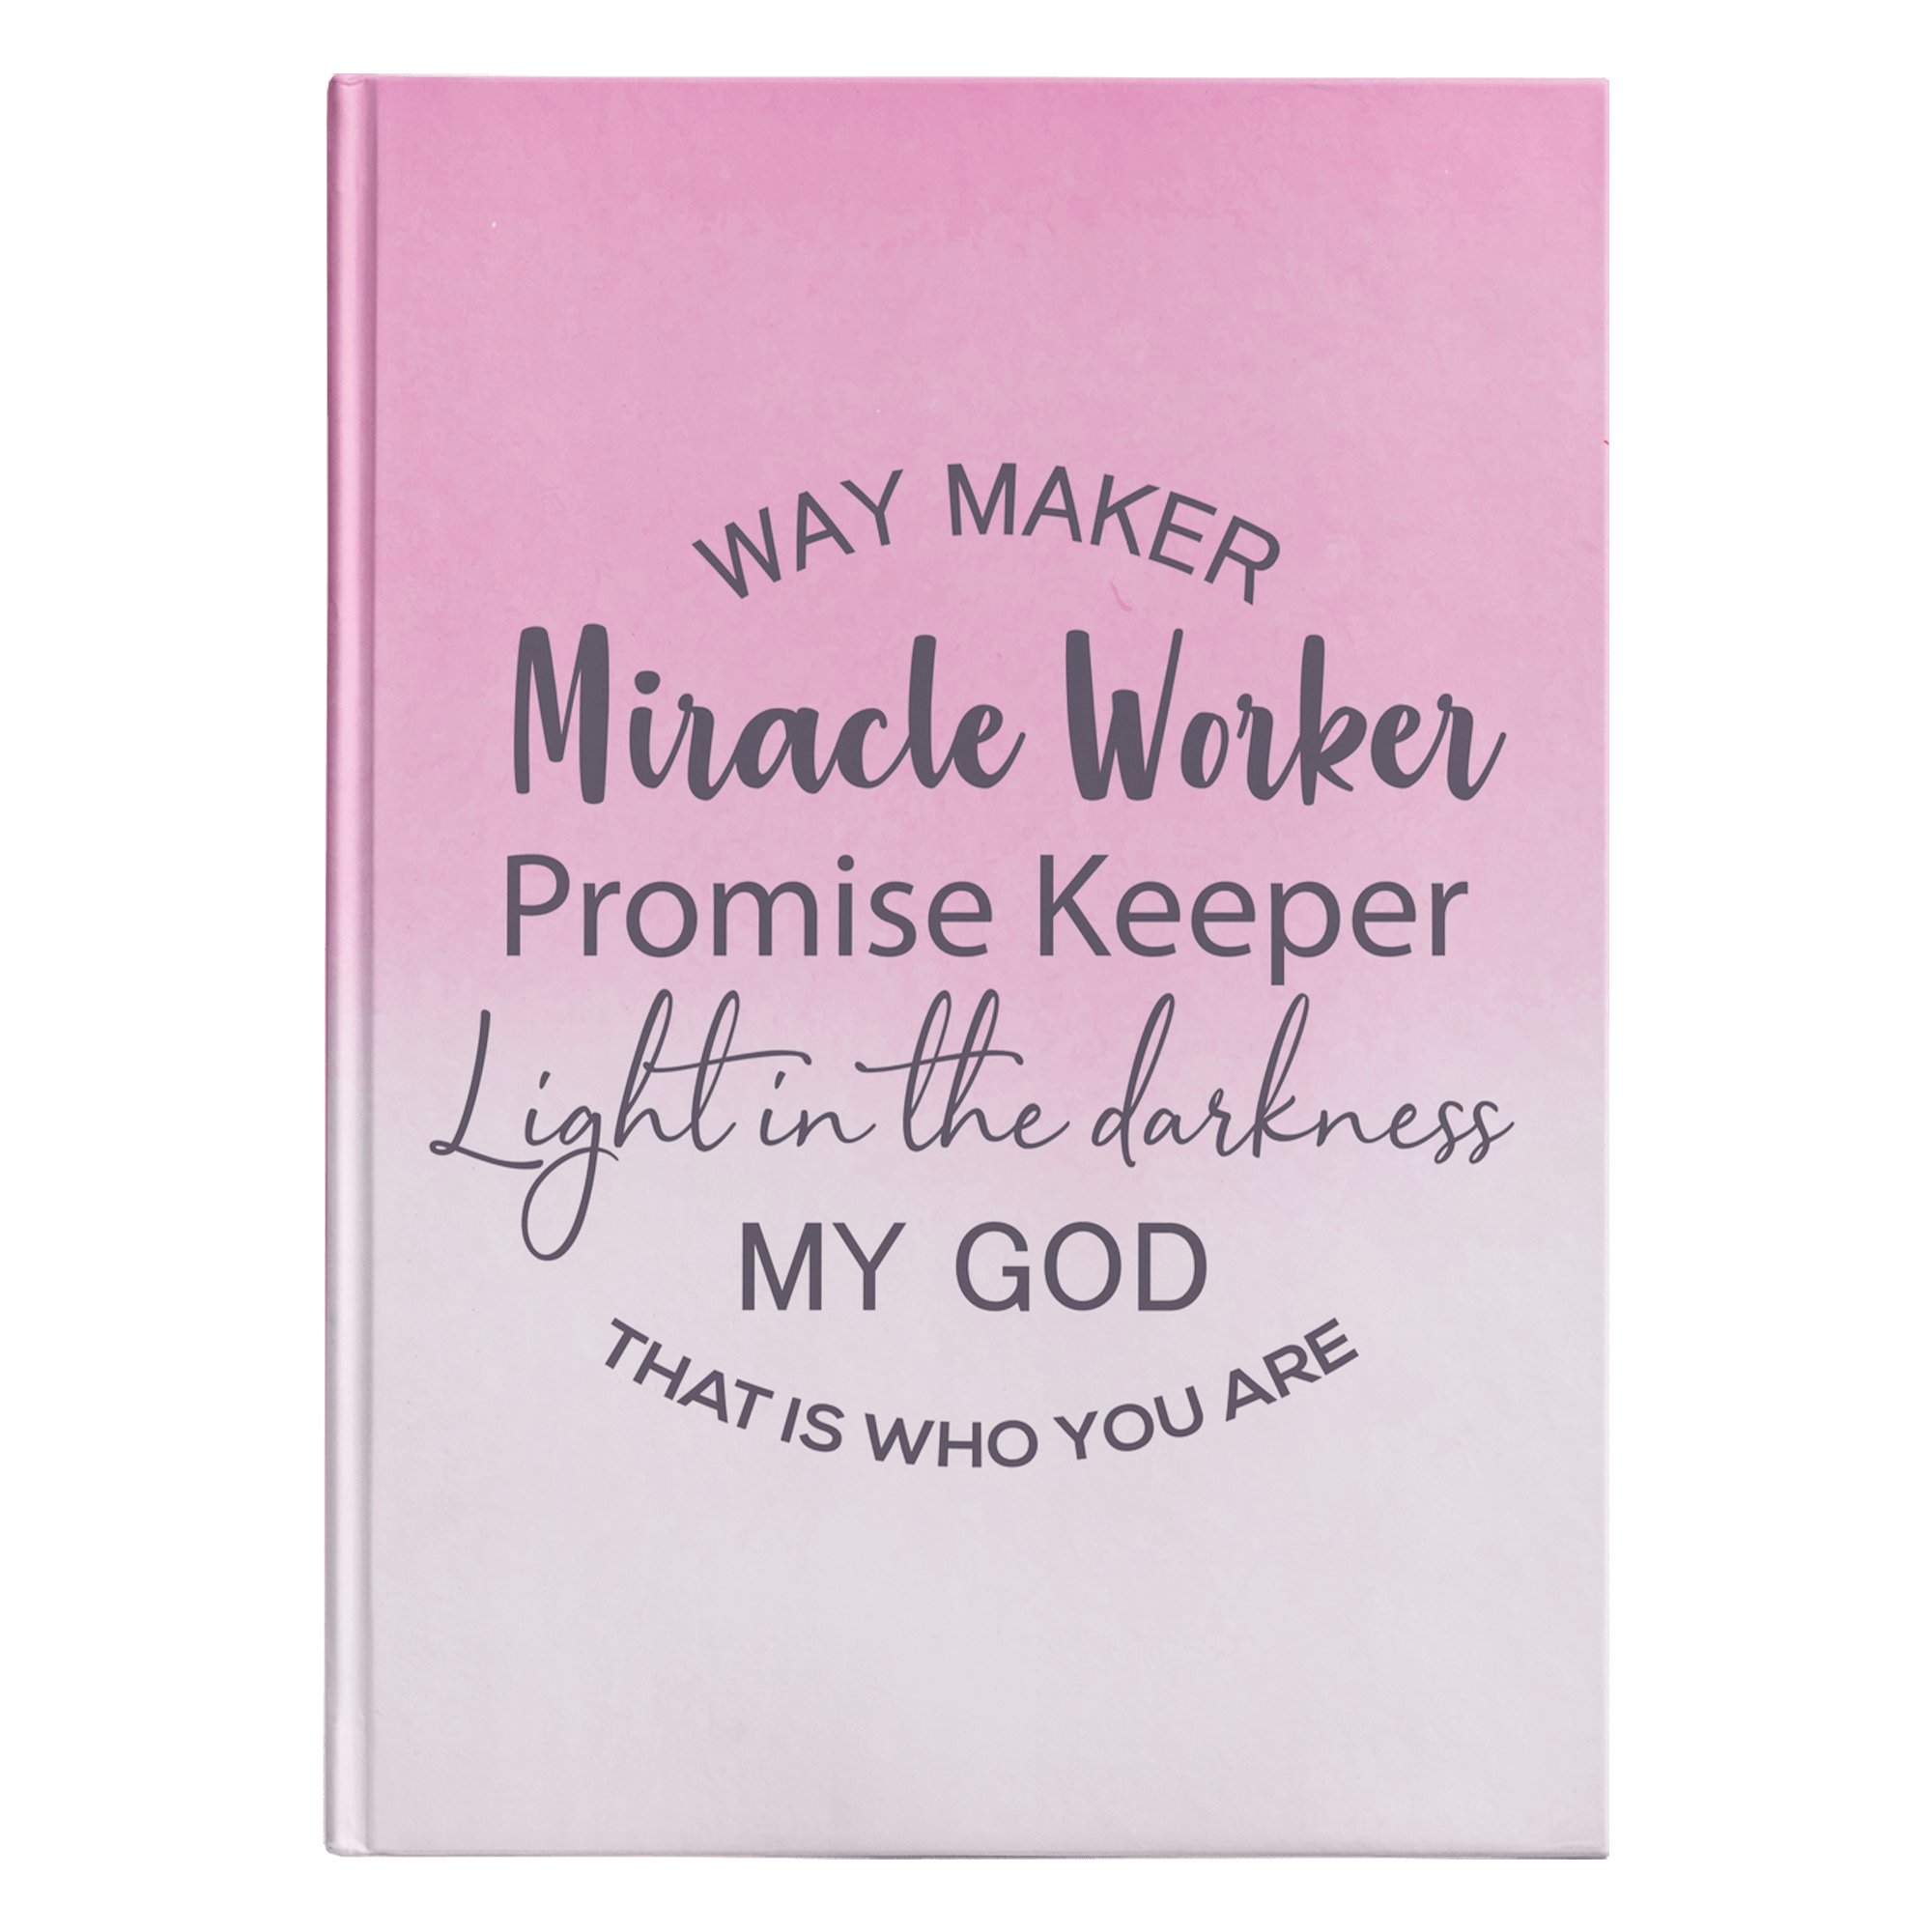 Way Maker Miracle Worker Journal - Used by God Clothing